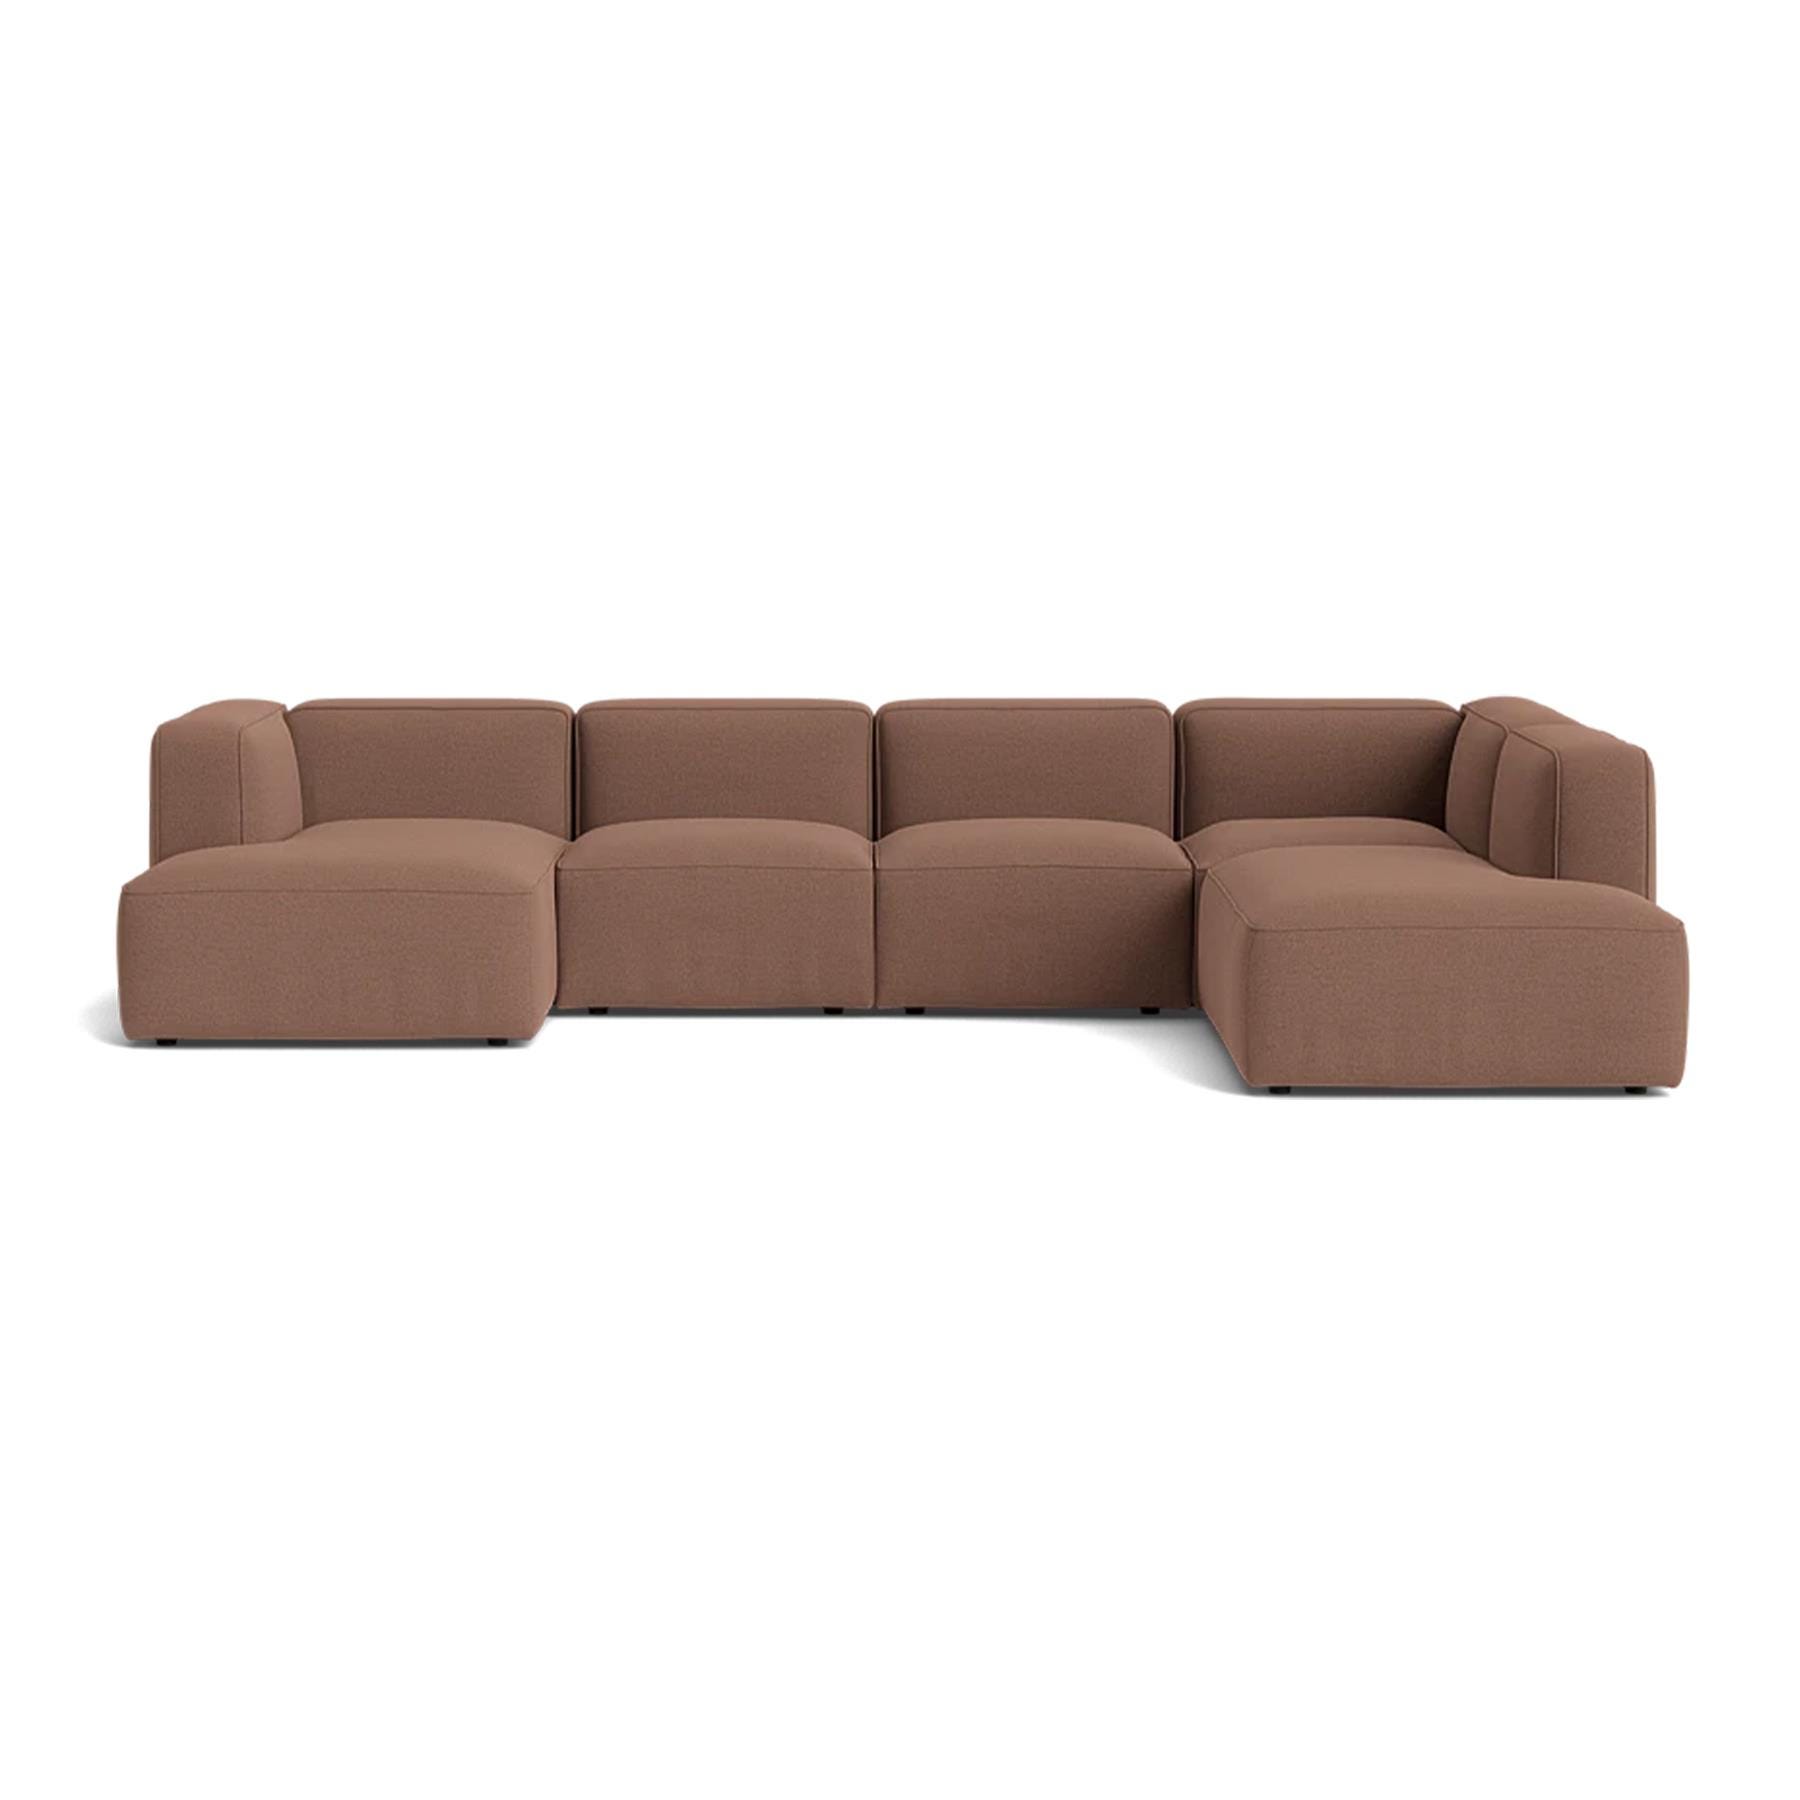 Make Nordic Basecamp Family Sofa Rewool 568 Left Red Designer Furniture From Holloways Of Ludlow